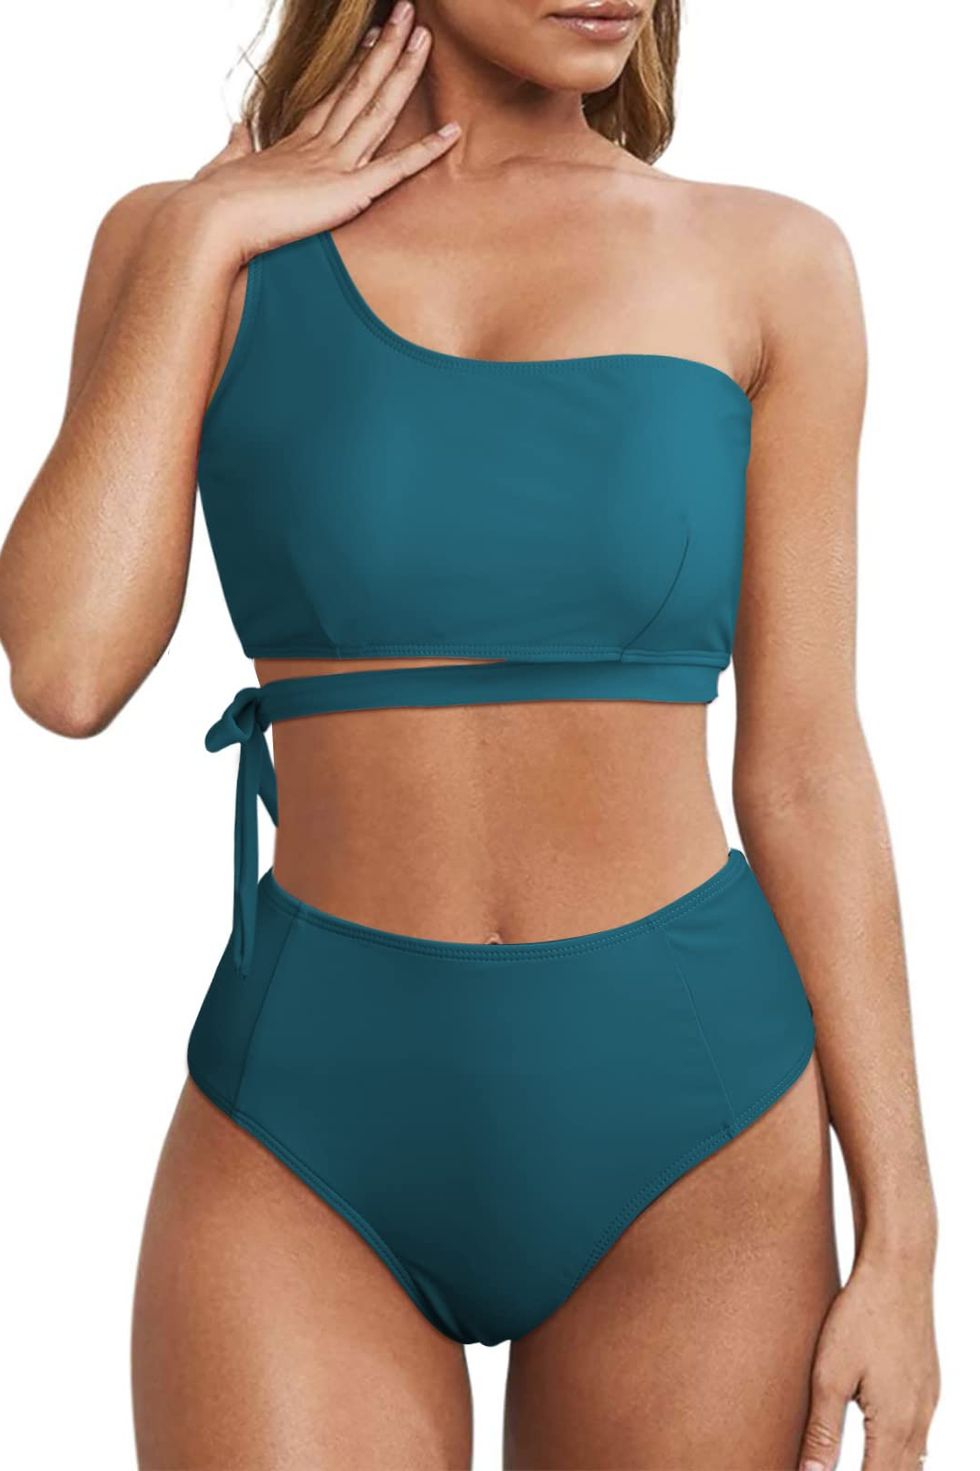 BIZIZA 2 Piece Bathing Suit with Built In Bra Workout Tank Top  Graphic/Solid Swimsuits High Waisted Crew Neck Bikini Set for Women  Two-Piece Set XL